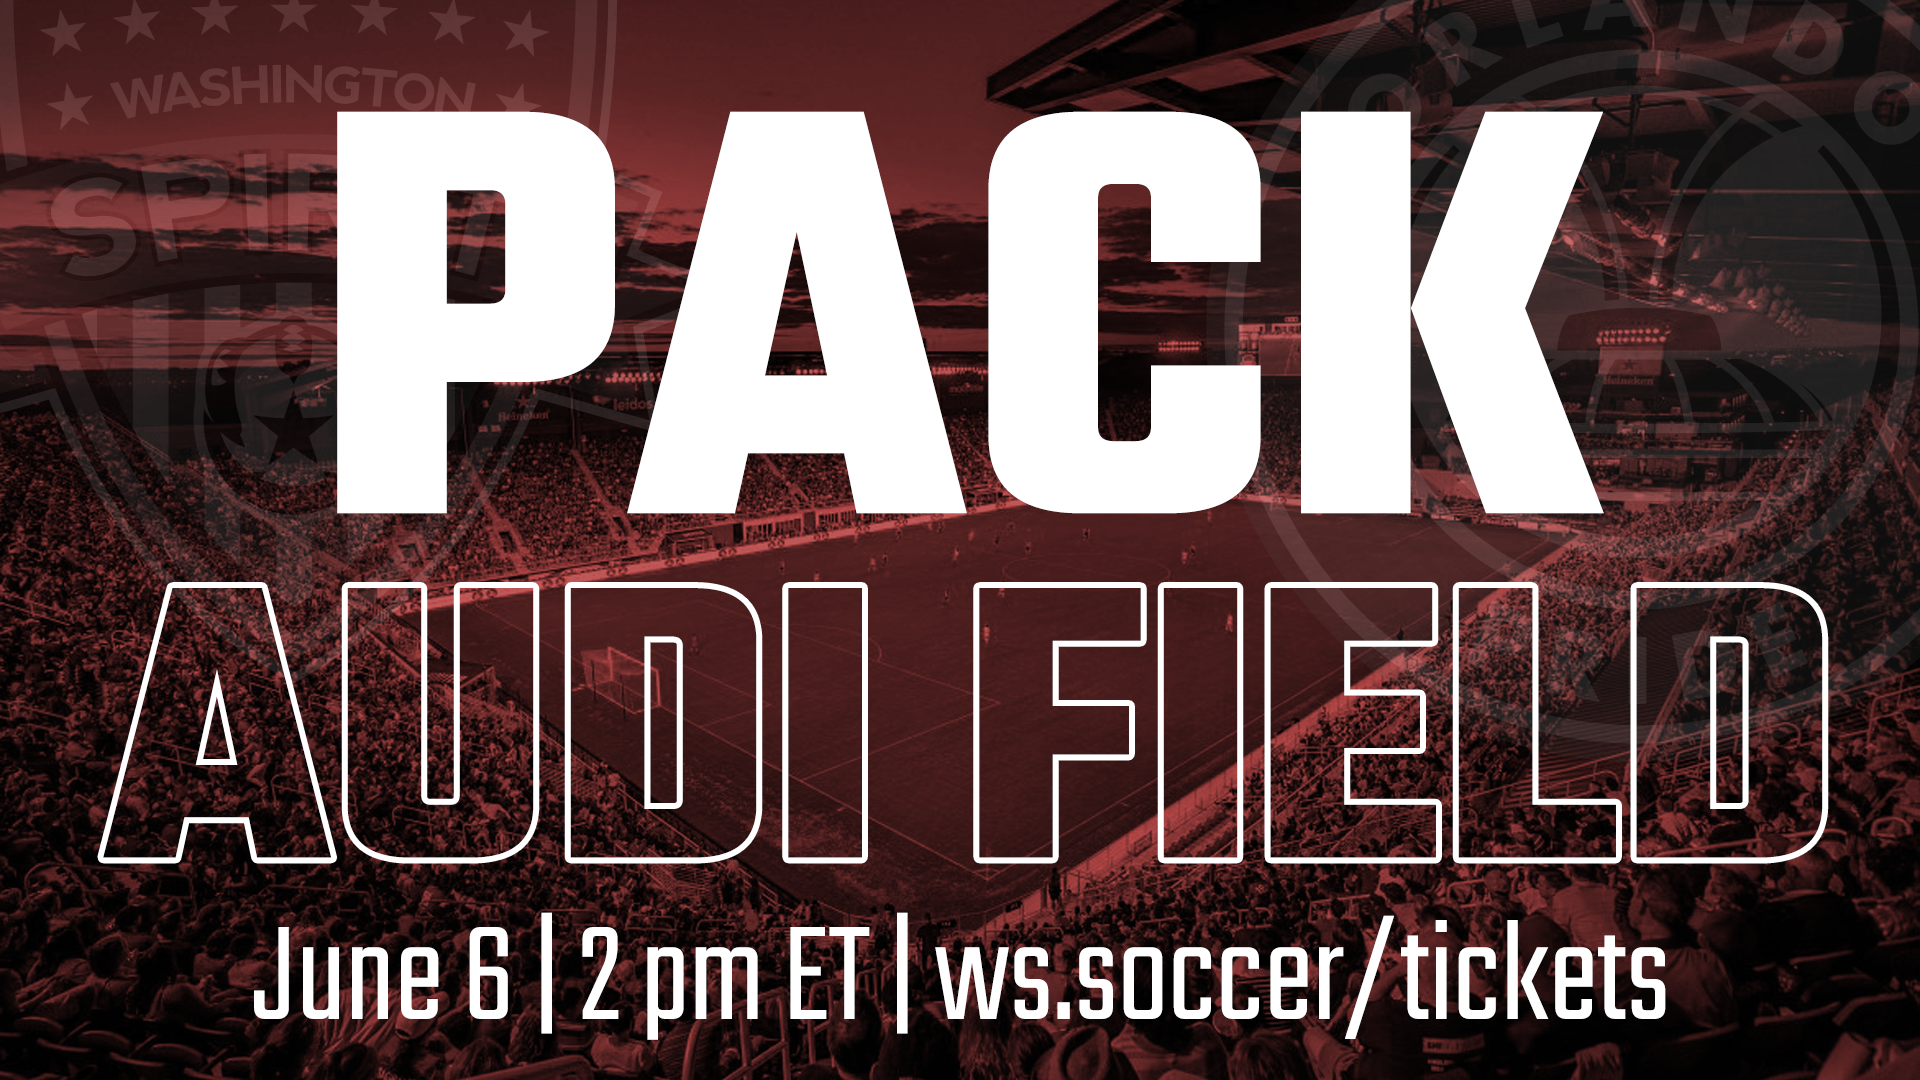 Steve’s Message to the Spirit Nation, “Pack Audi Field on June 6th!” Featured Image